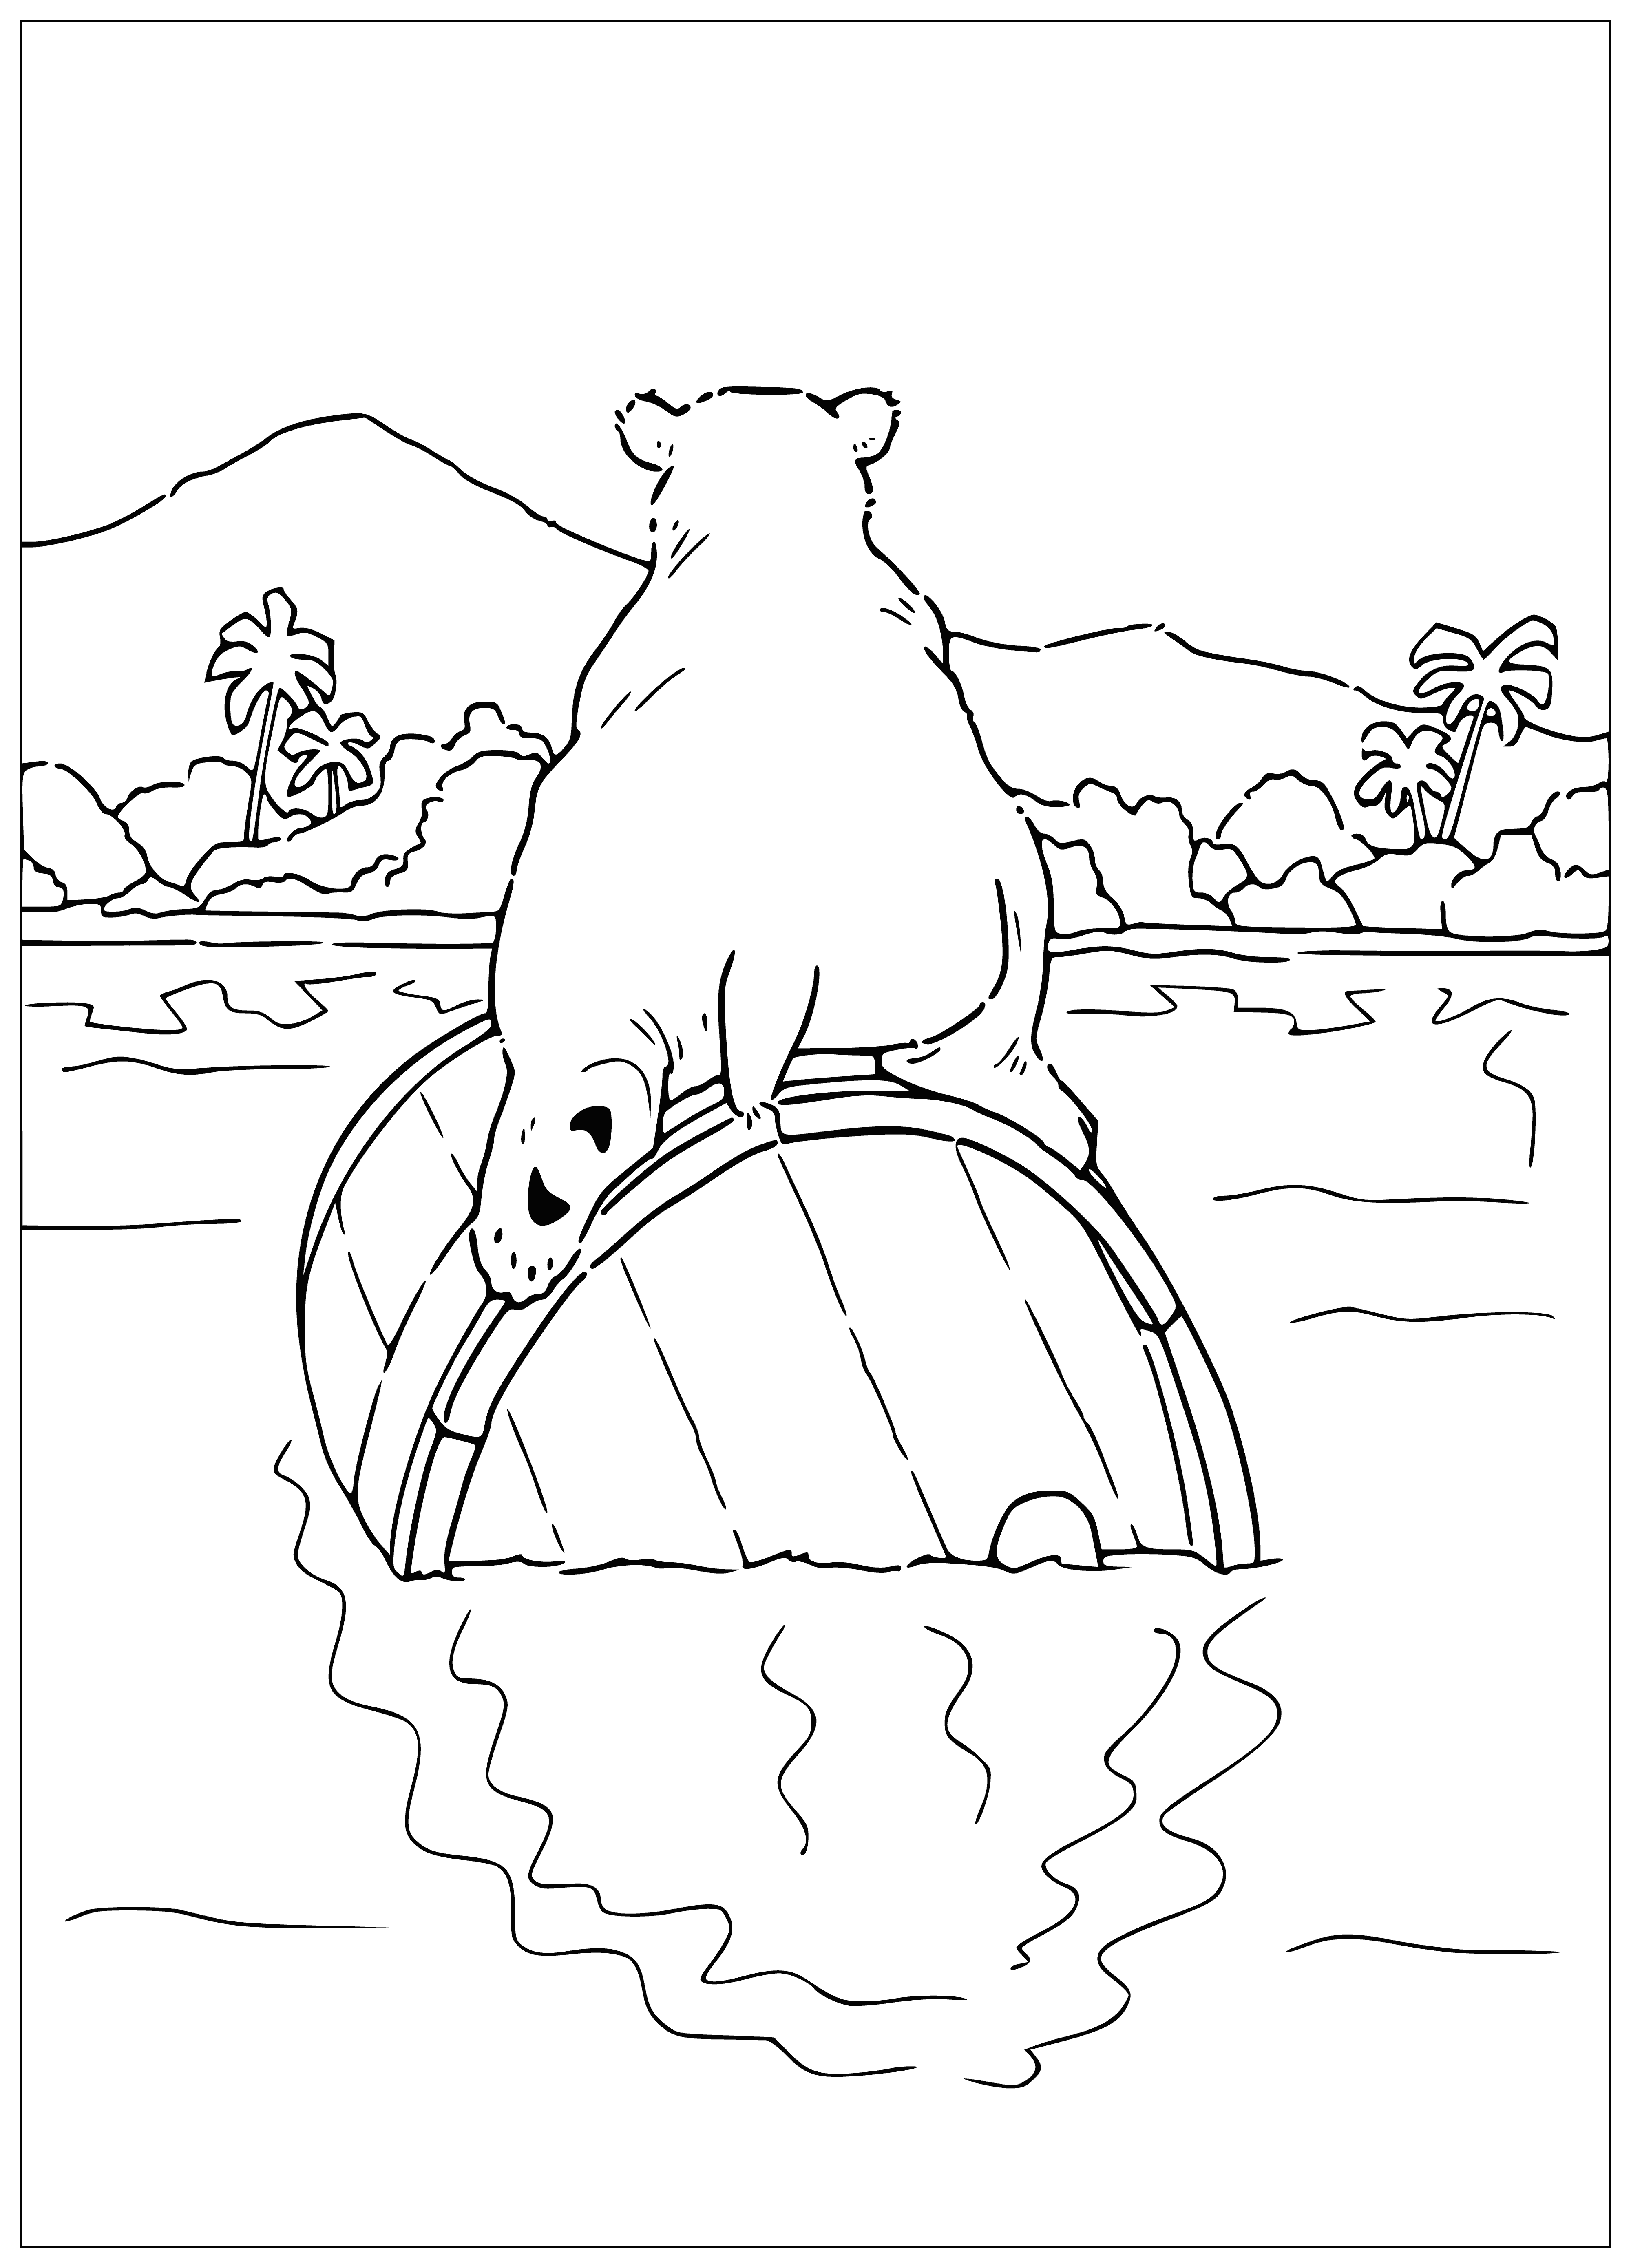 Lars on a barrel coloring page